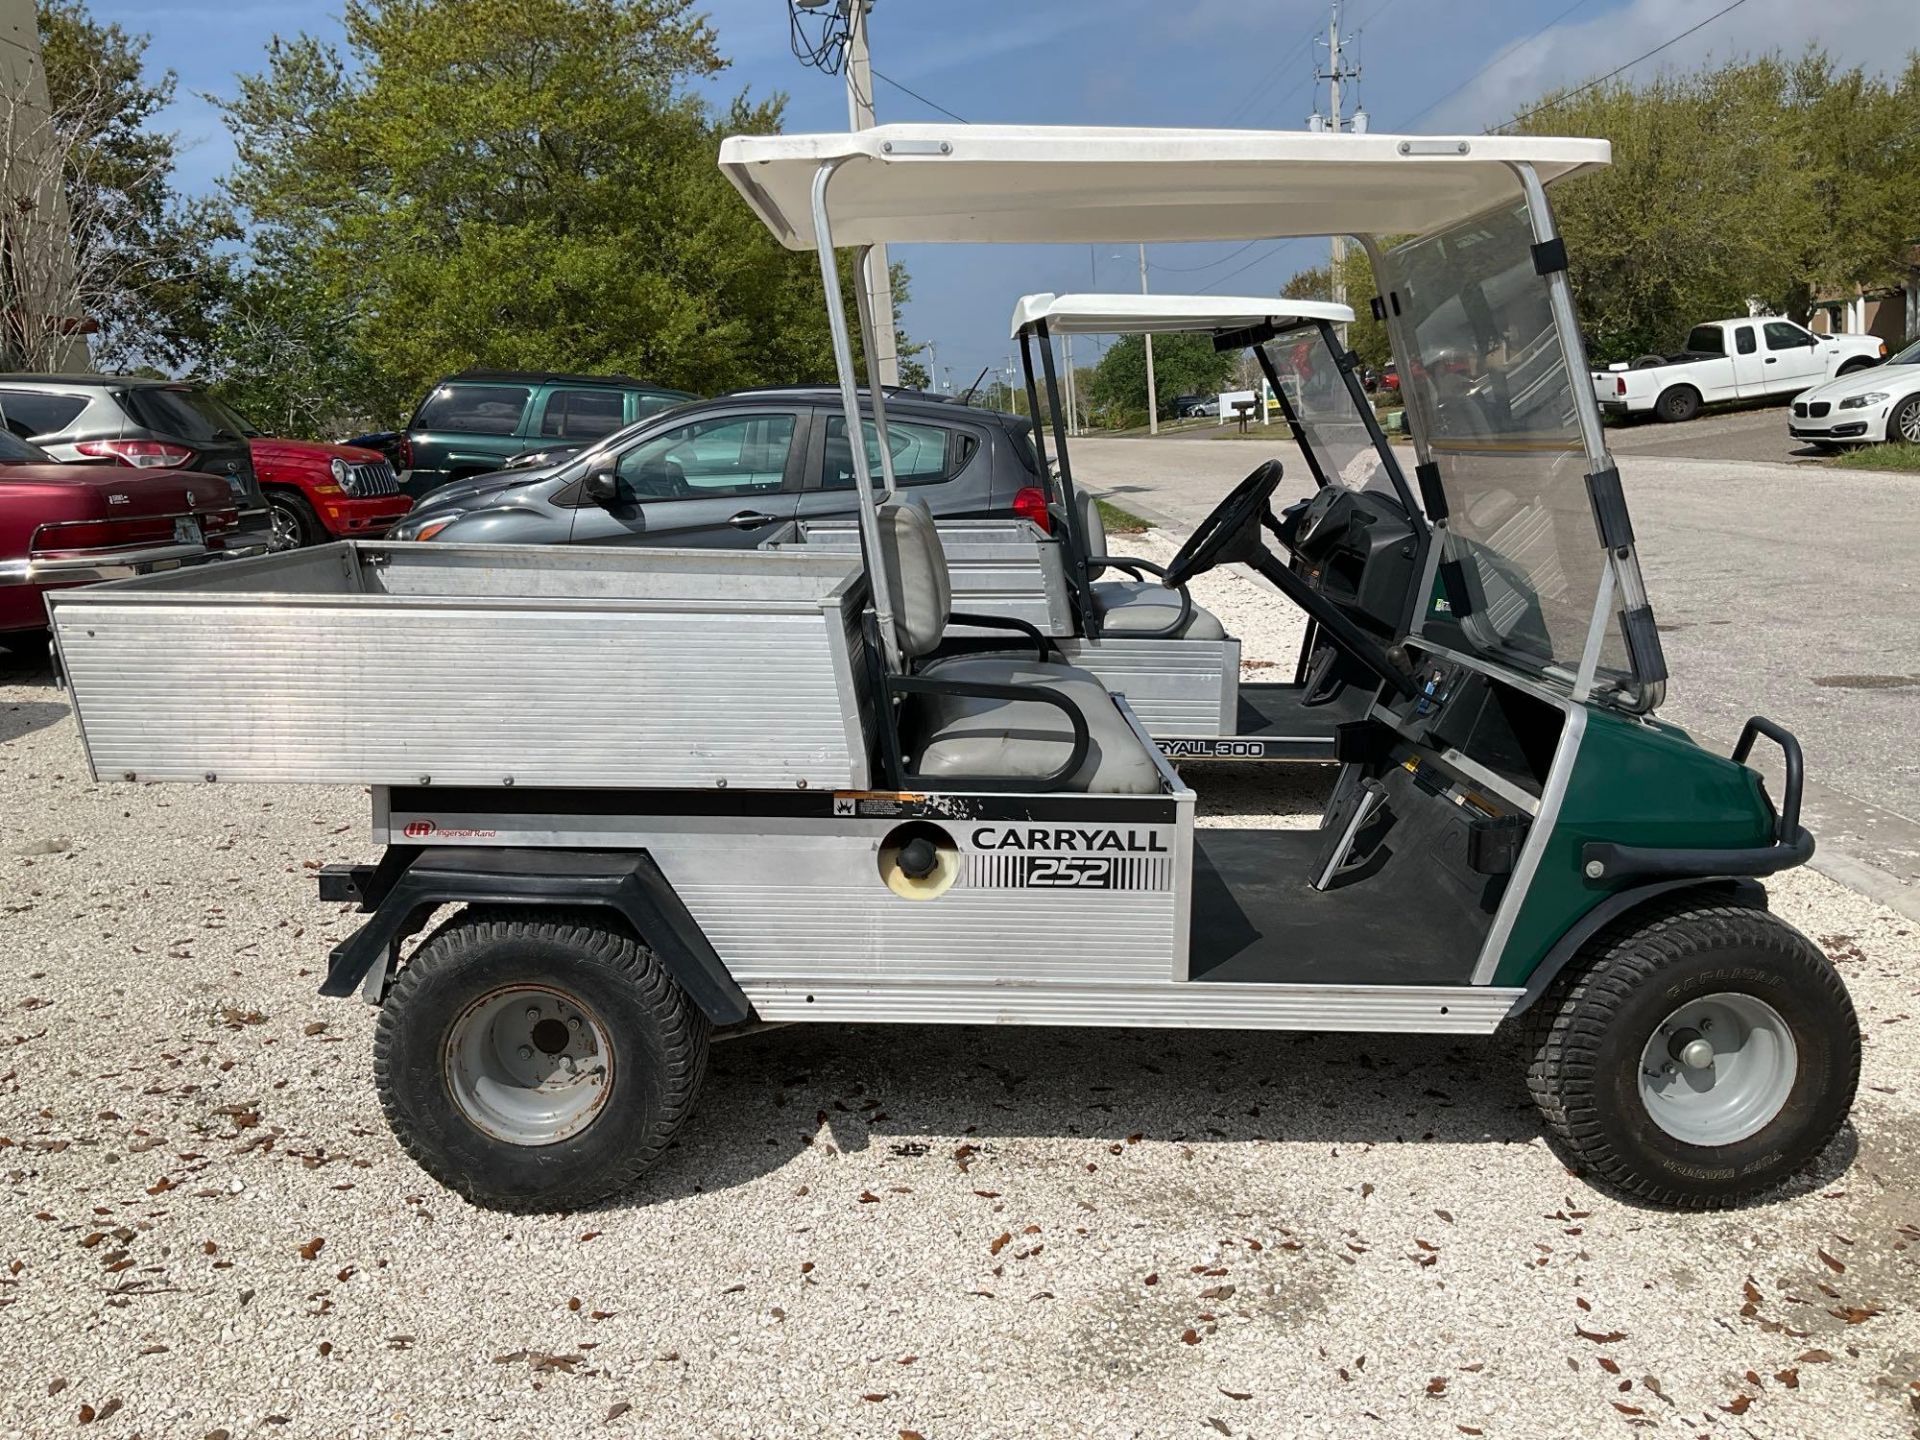 CLUB CAR CARRYALL 252 , GAS POWERED, MANUAL DUMP BED, HITCH , BILL OF SALE ONLY, RUNS & DRIVES - Image 2 of 13